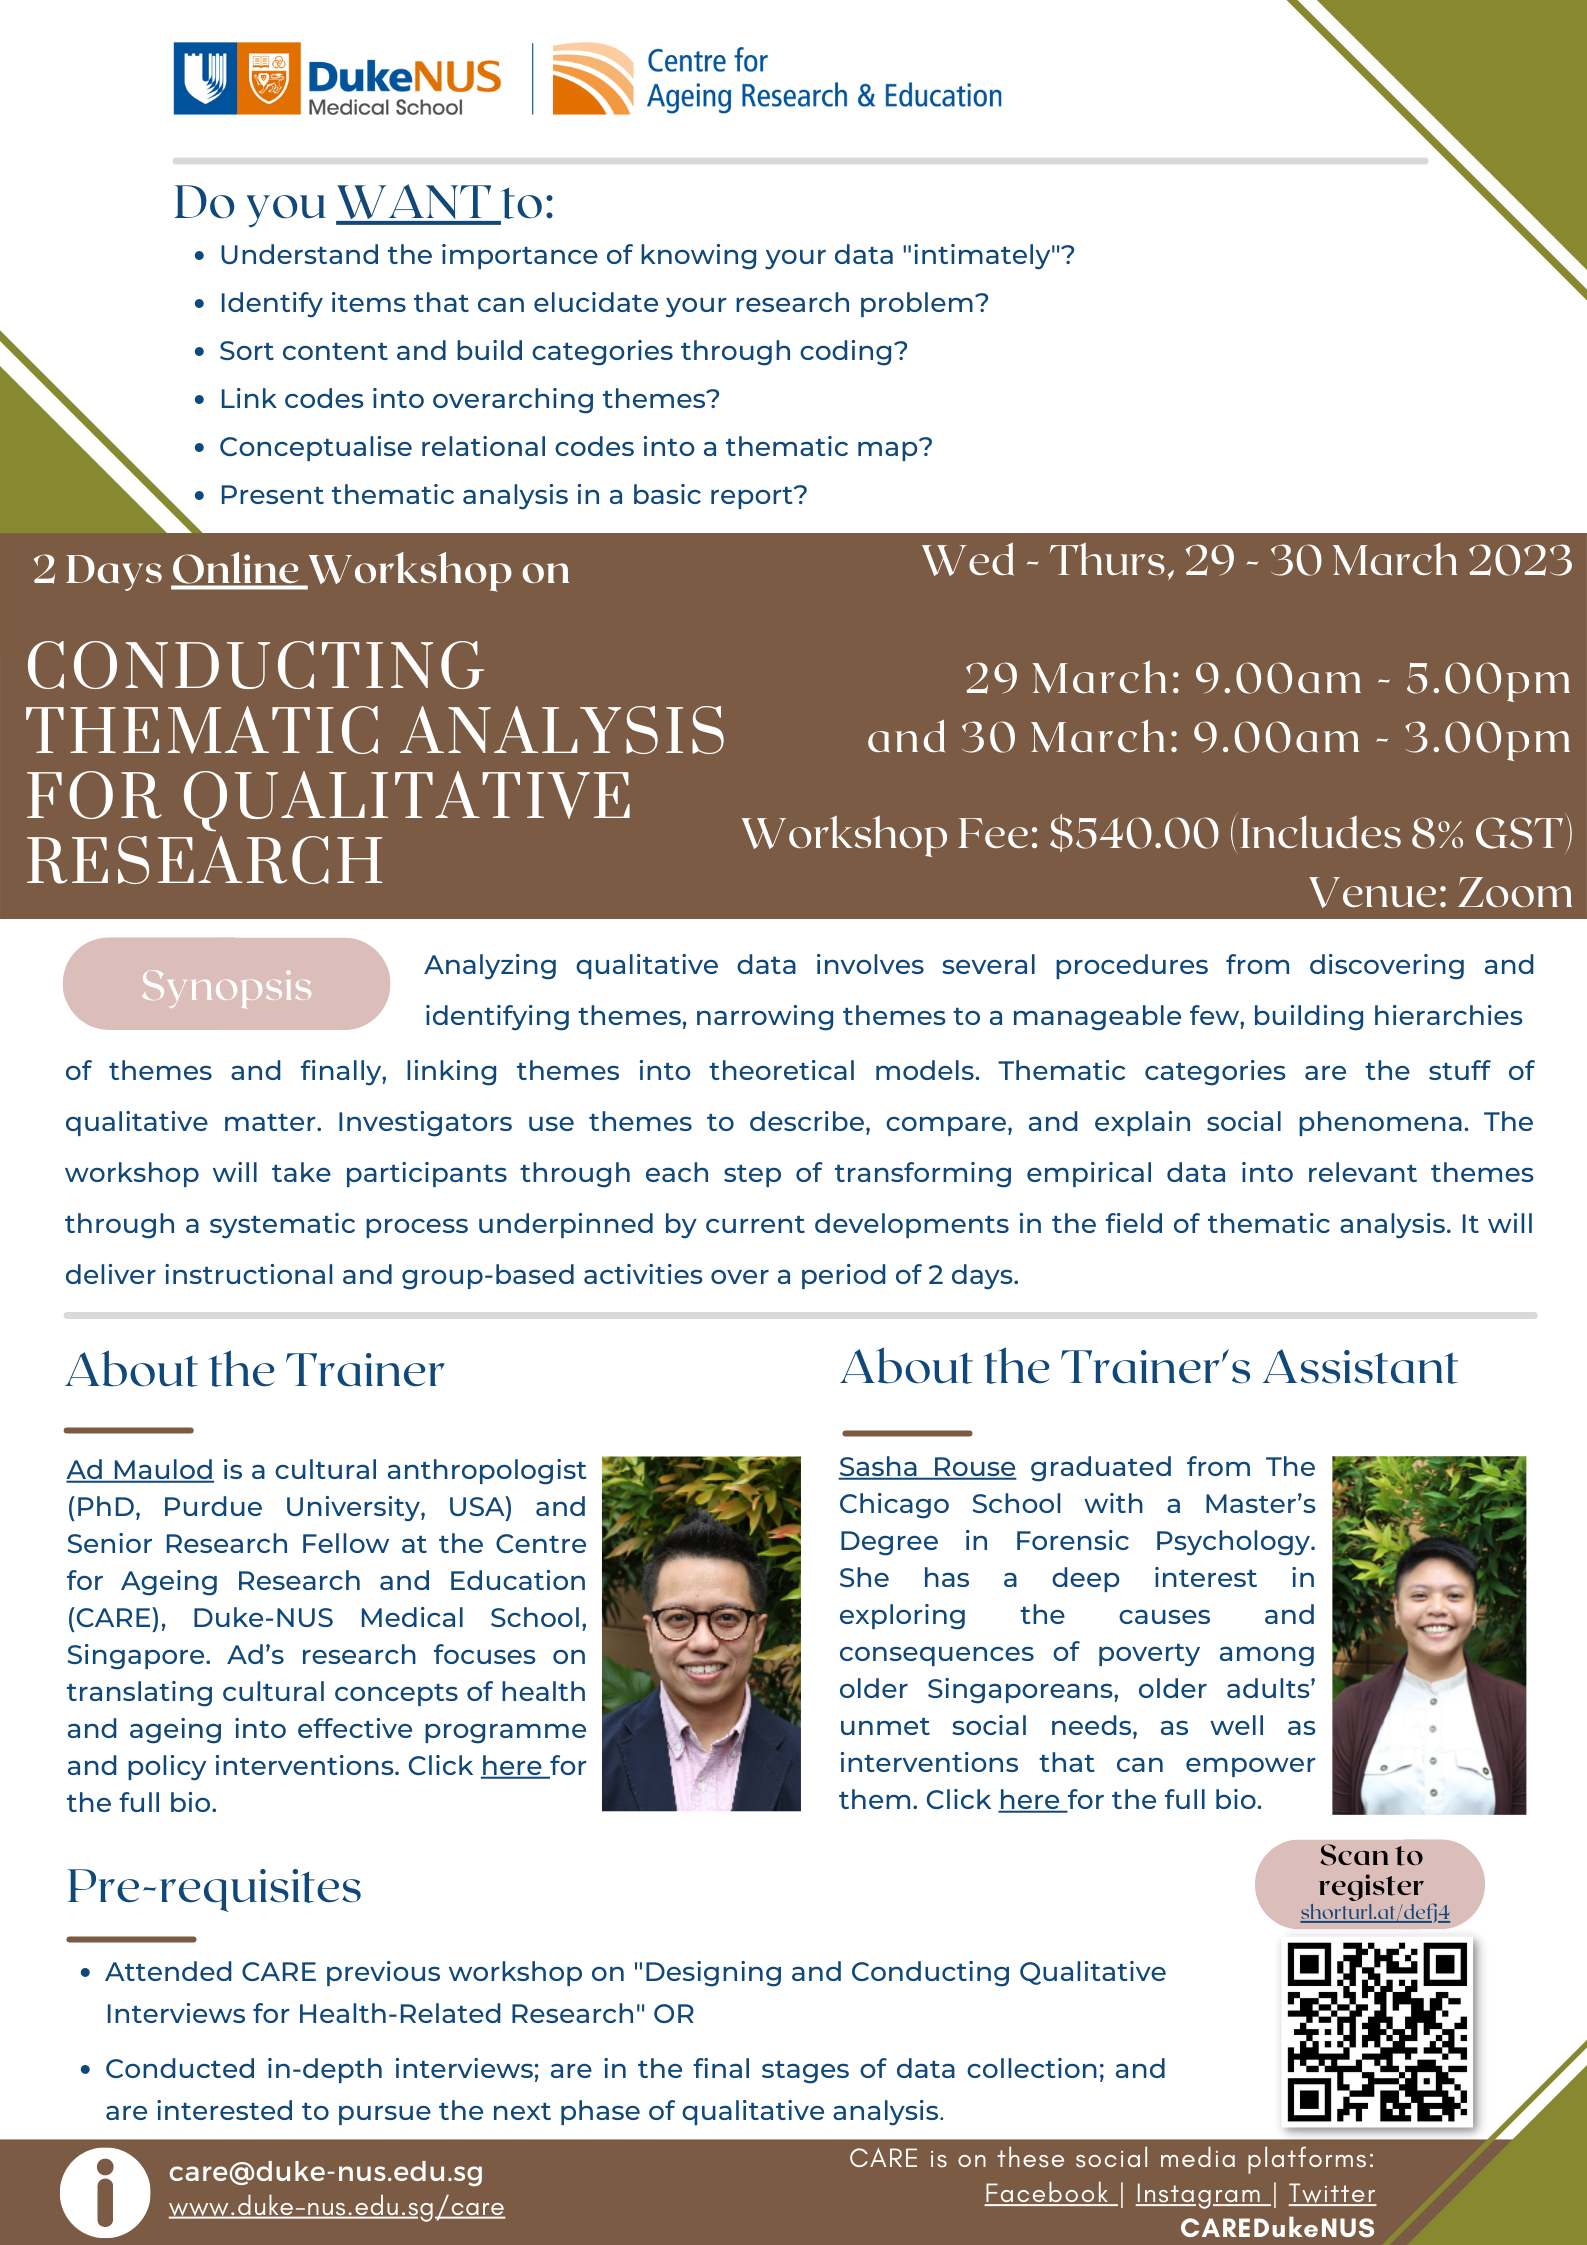 Conducting Thematic Analysis for Qualitative Research Workshop 29-30 Mar 2023